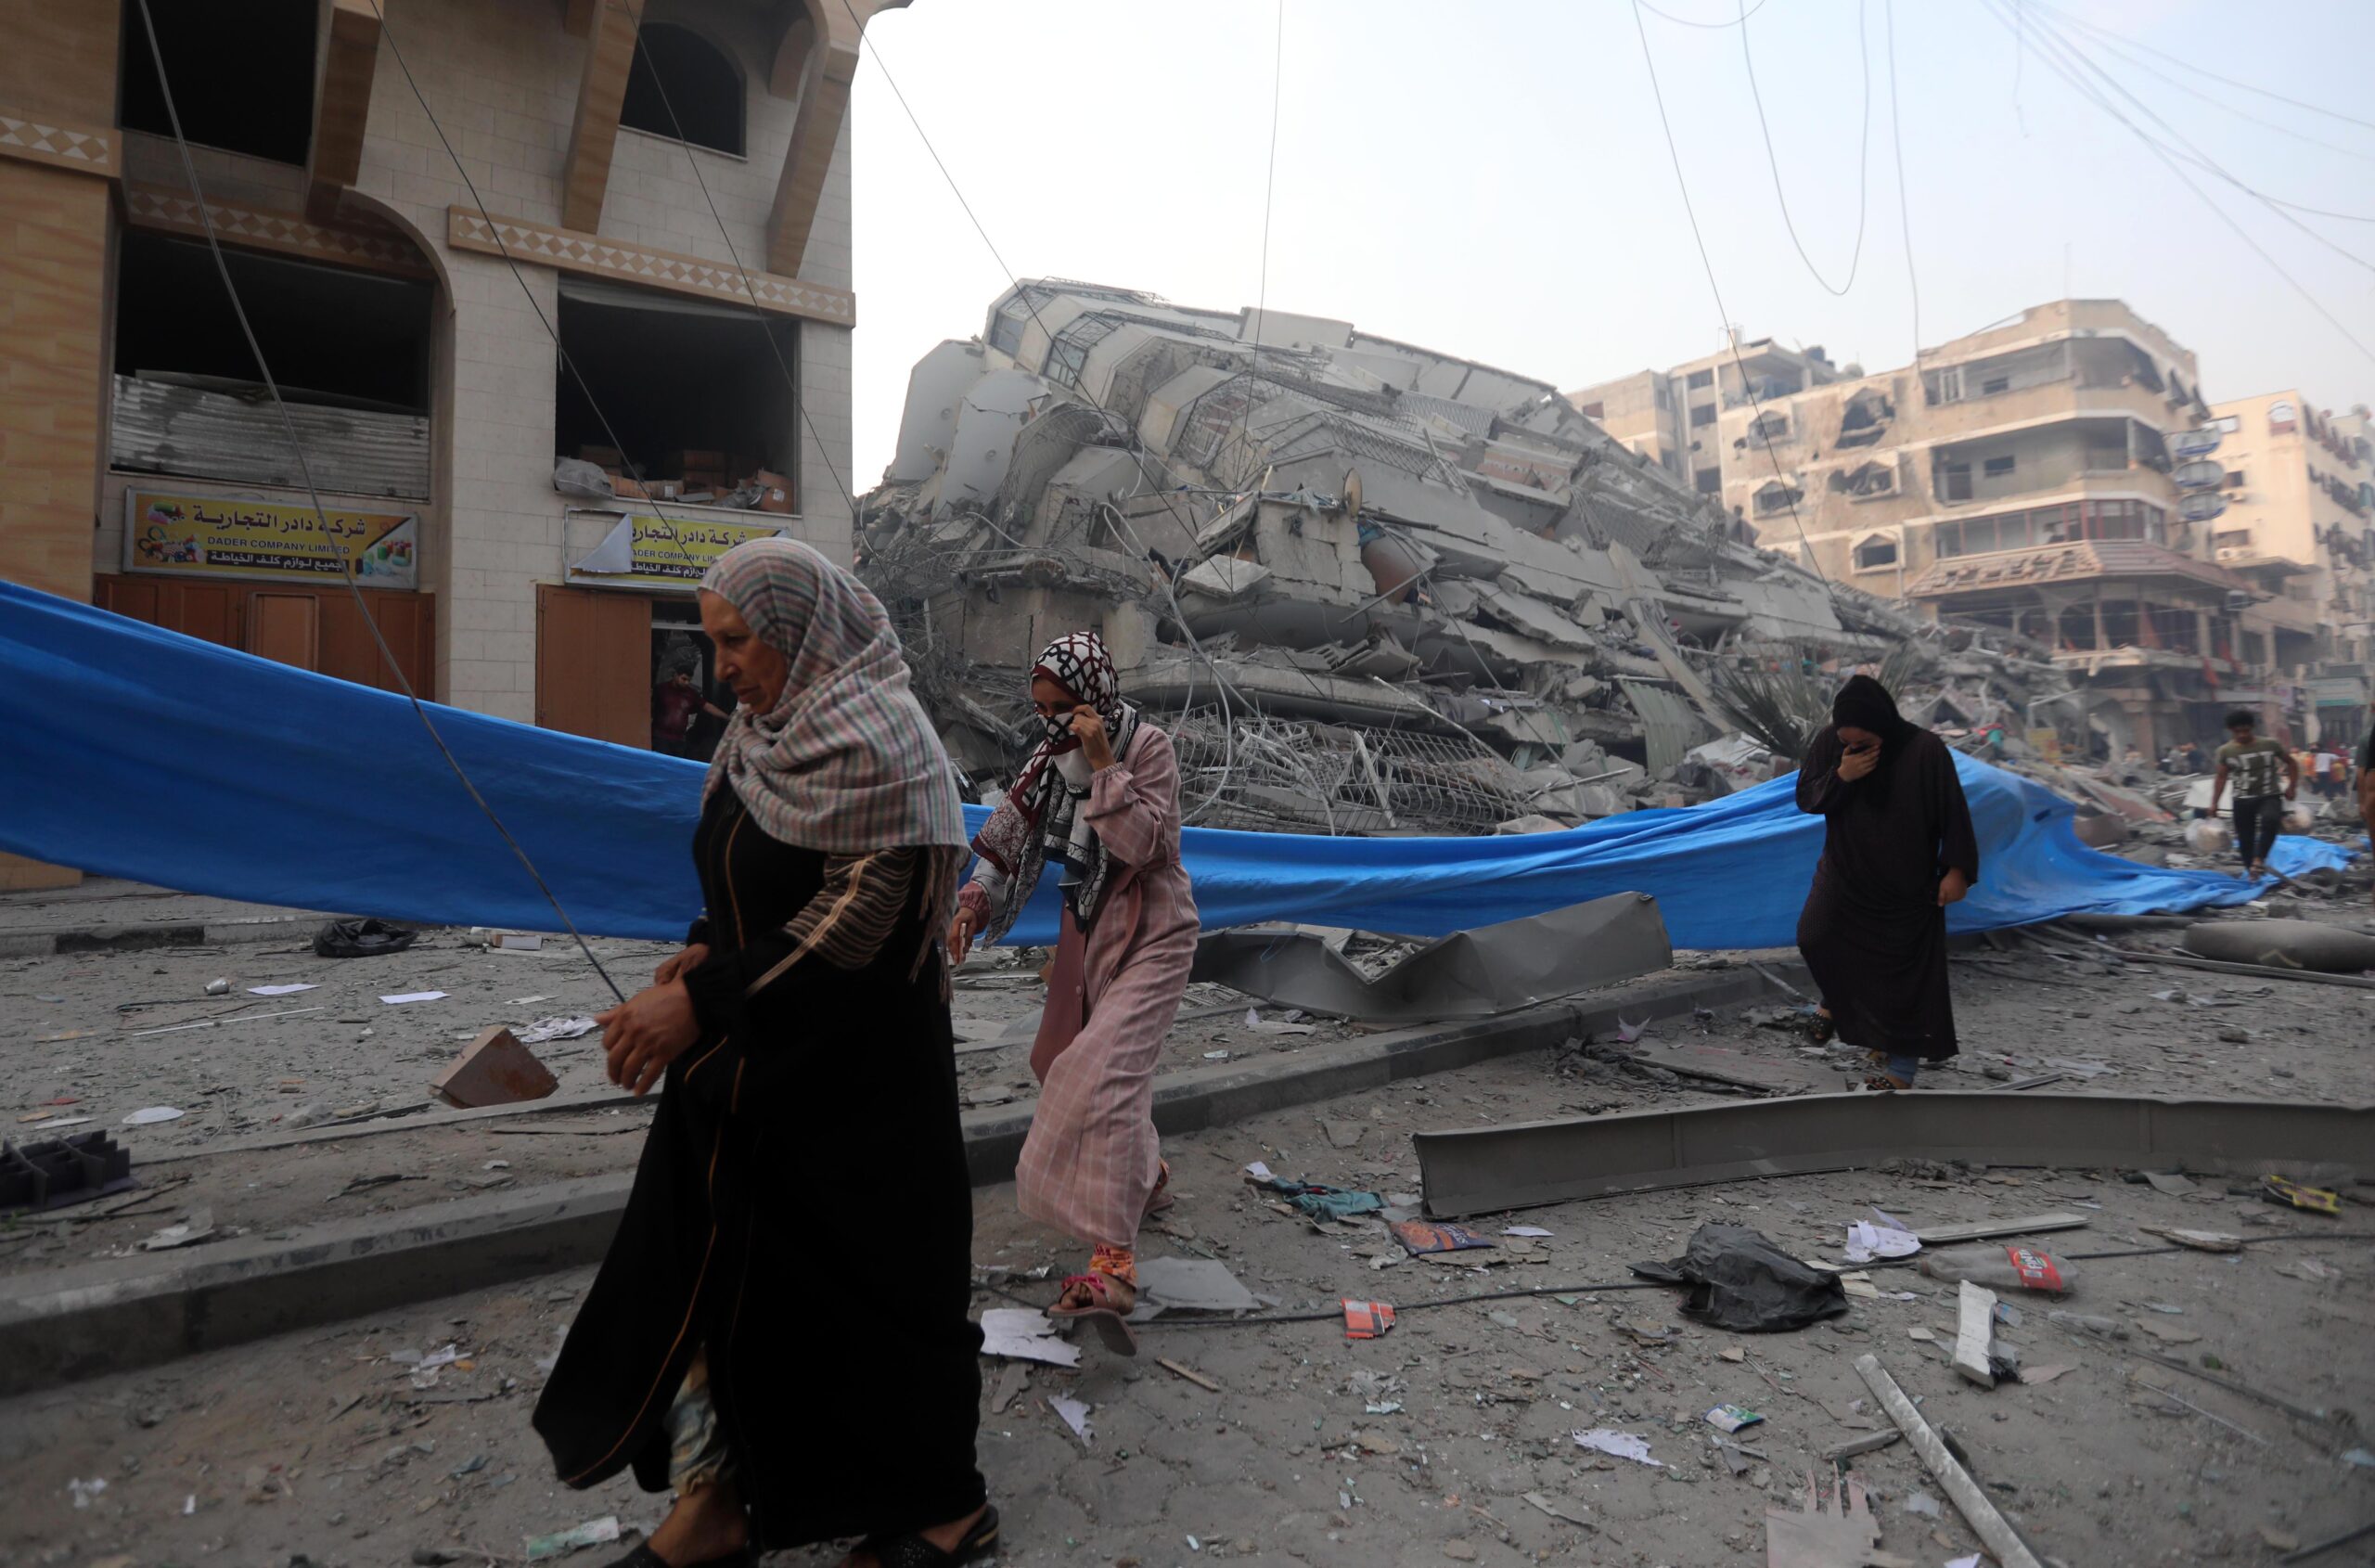 Three women walking through rubble after their house was destroyed in the Nasr neighbourhood in the Gaza Strip.